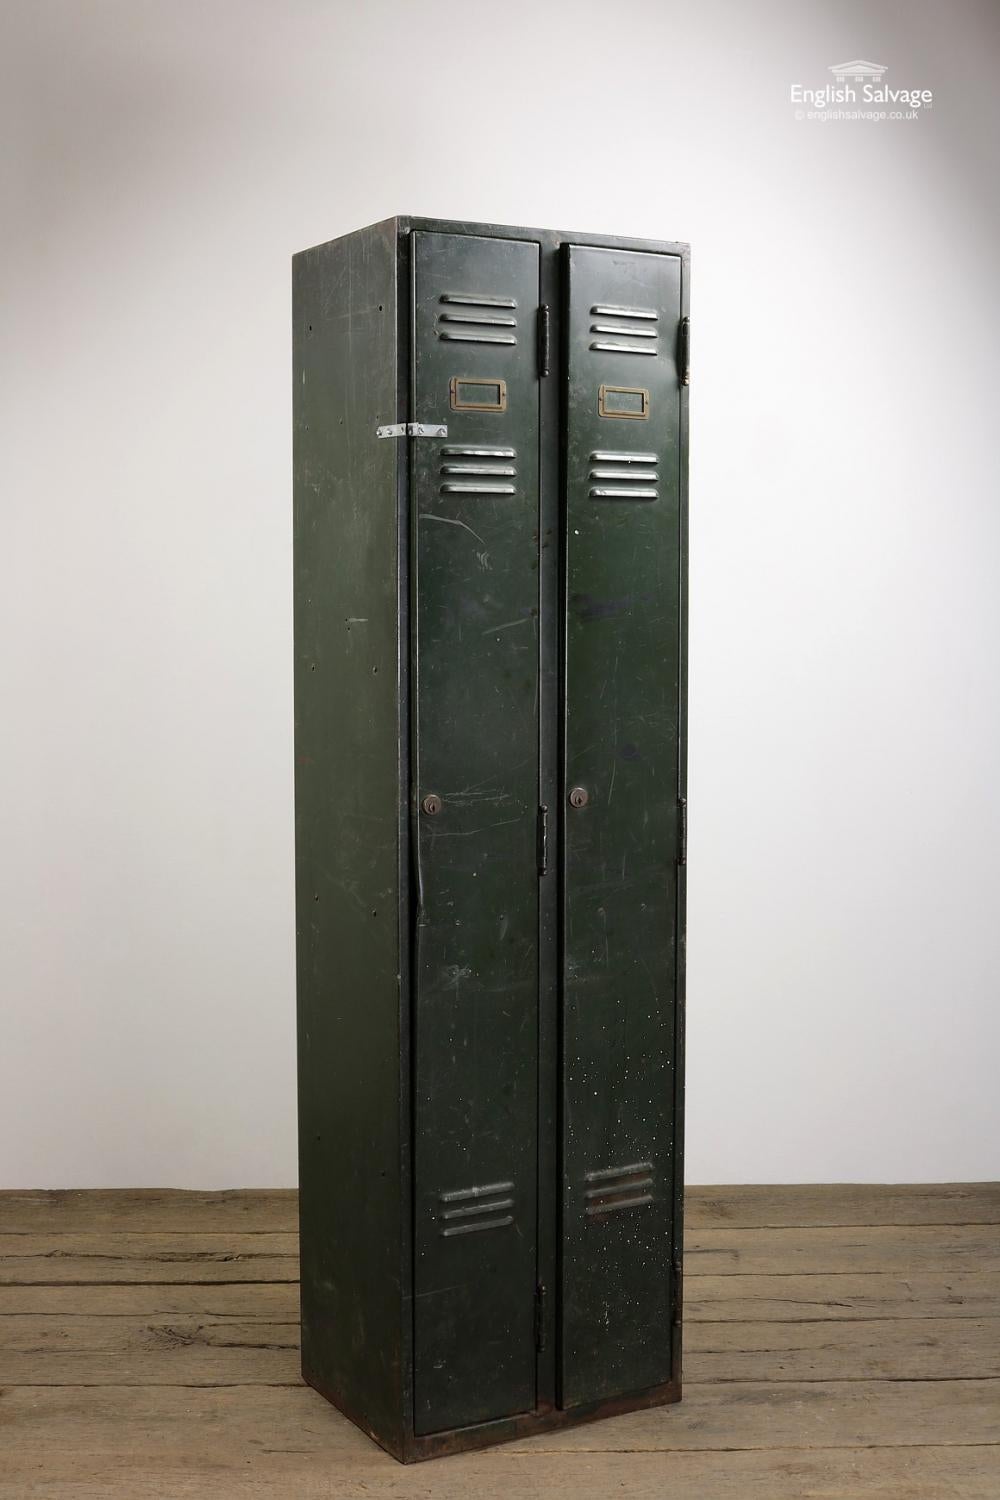 Reclaimed vintage Industrial style metal double locker, painted green. With name plate holders, an internal shelf in each locker and supports for an additional two shelves per locker.

No keys present, small holes in sides and back (likely to have